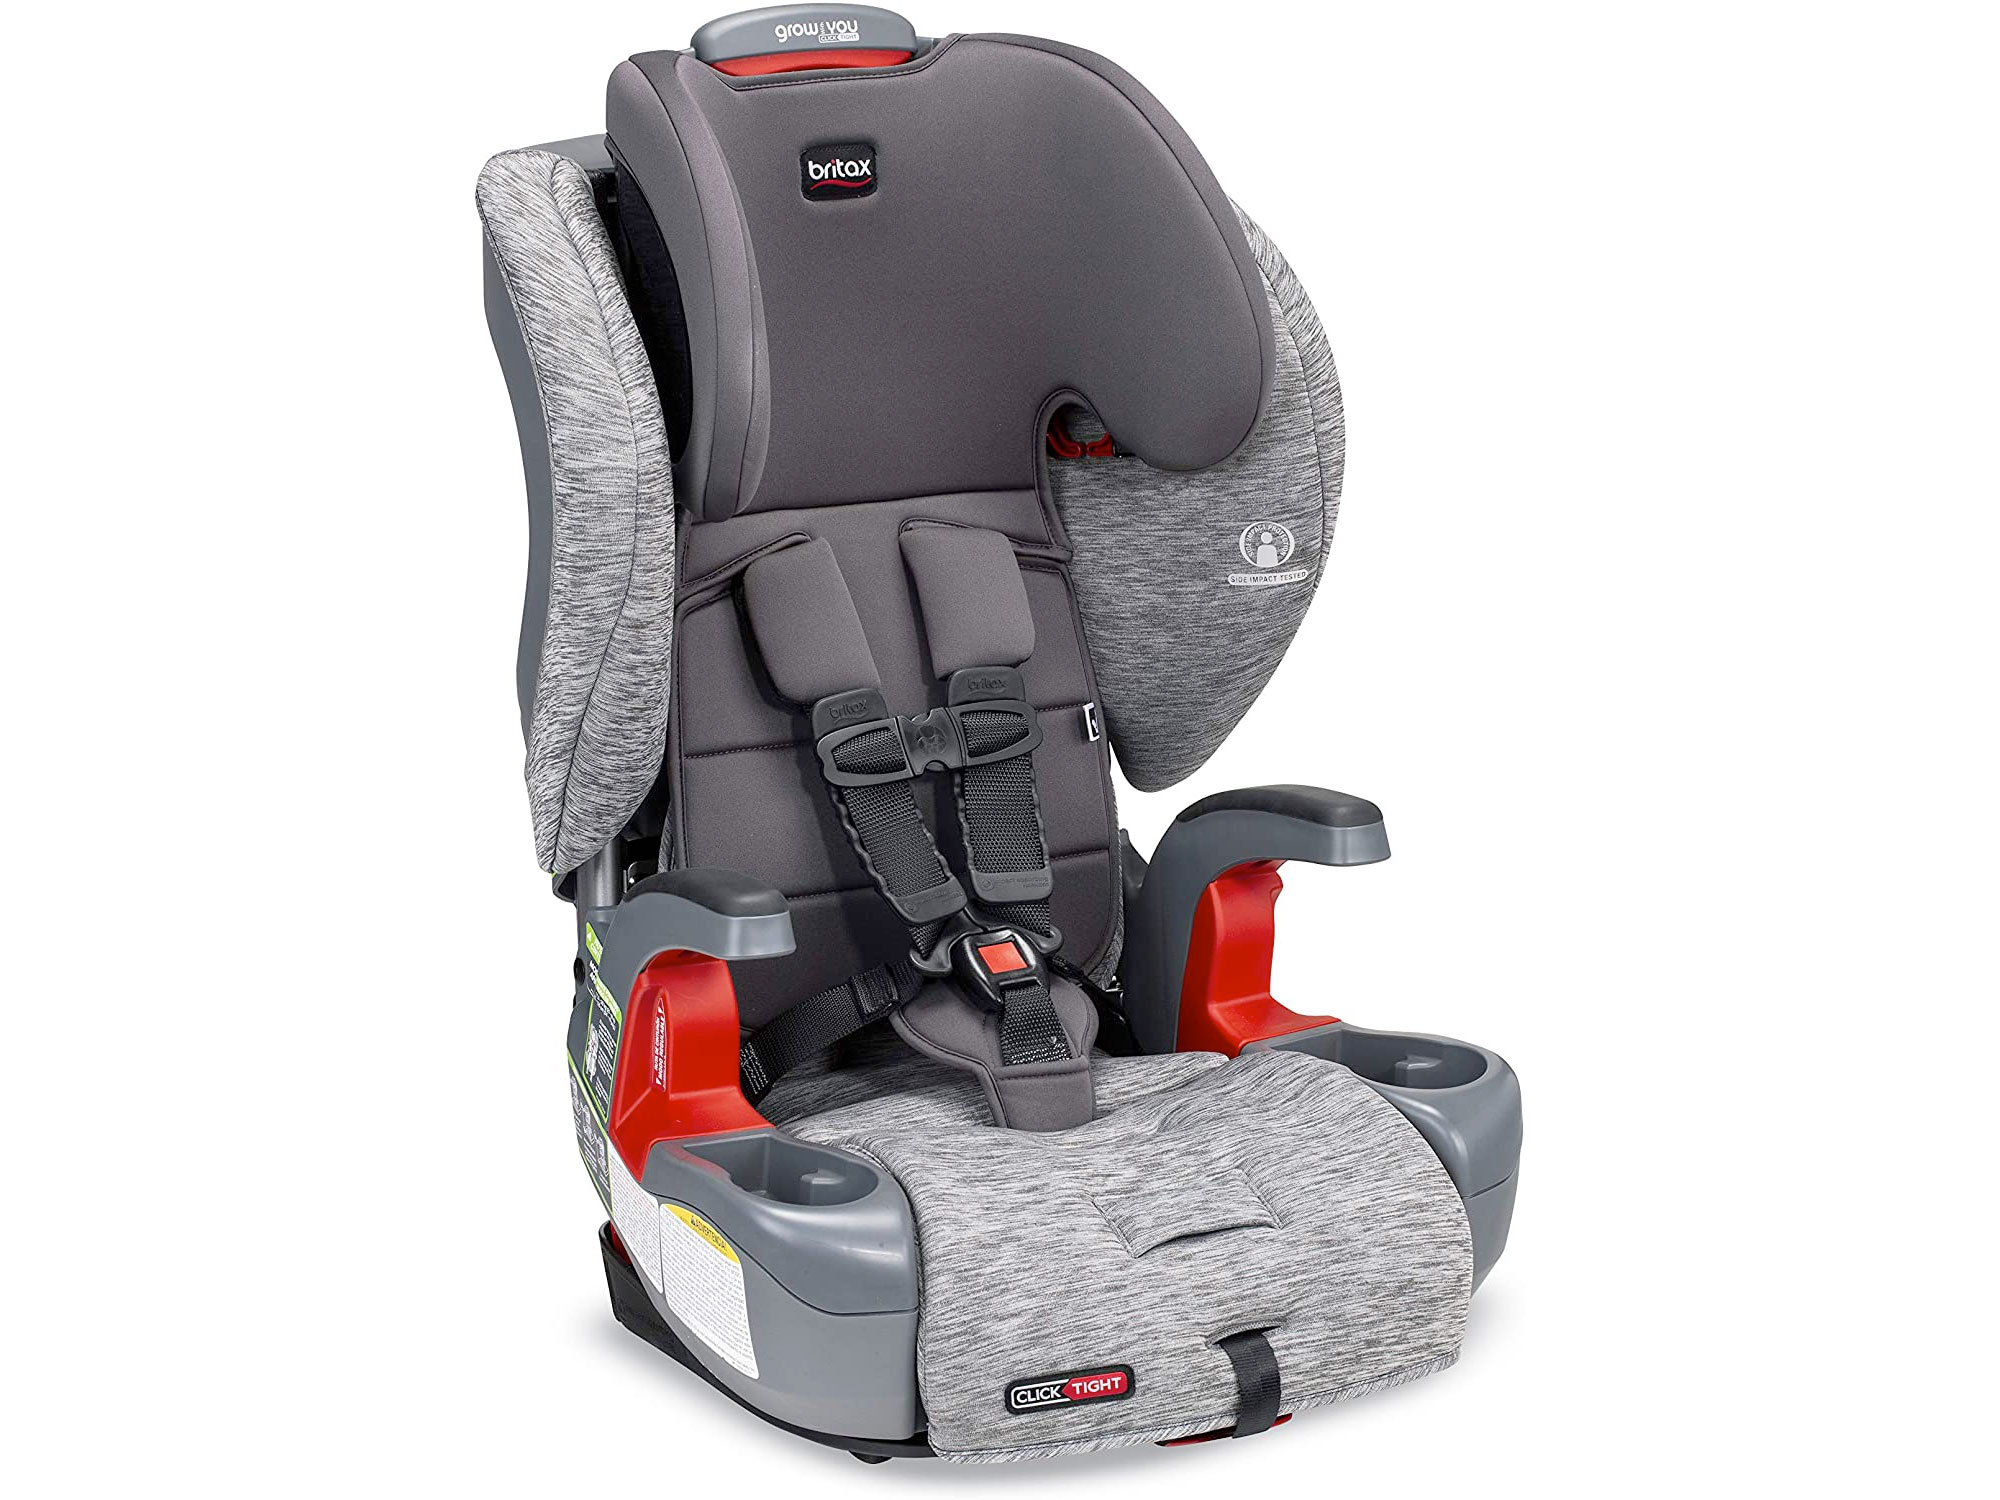 Amazon：BRITAX Grow with You ClickTight Harness-2-Booster Car Seat只賣$390.97